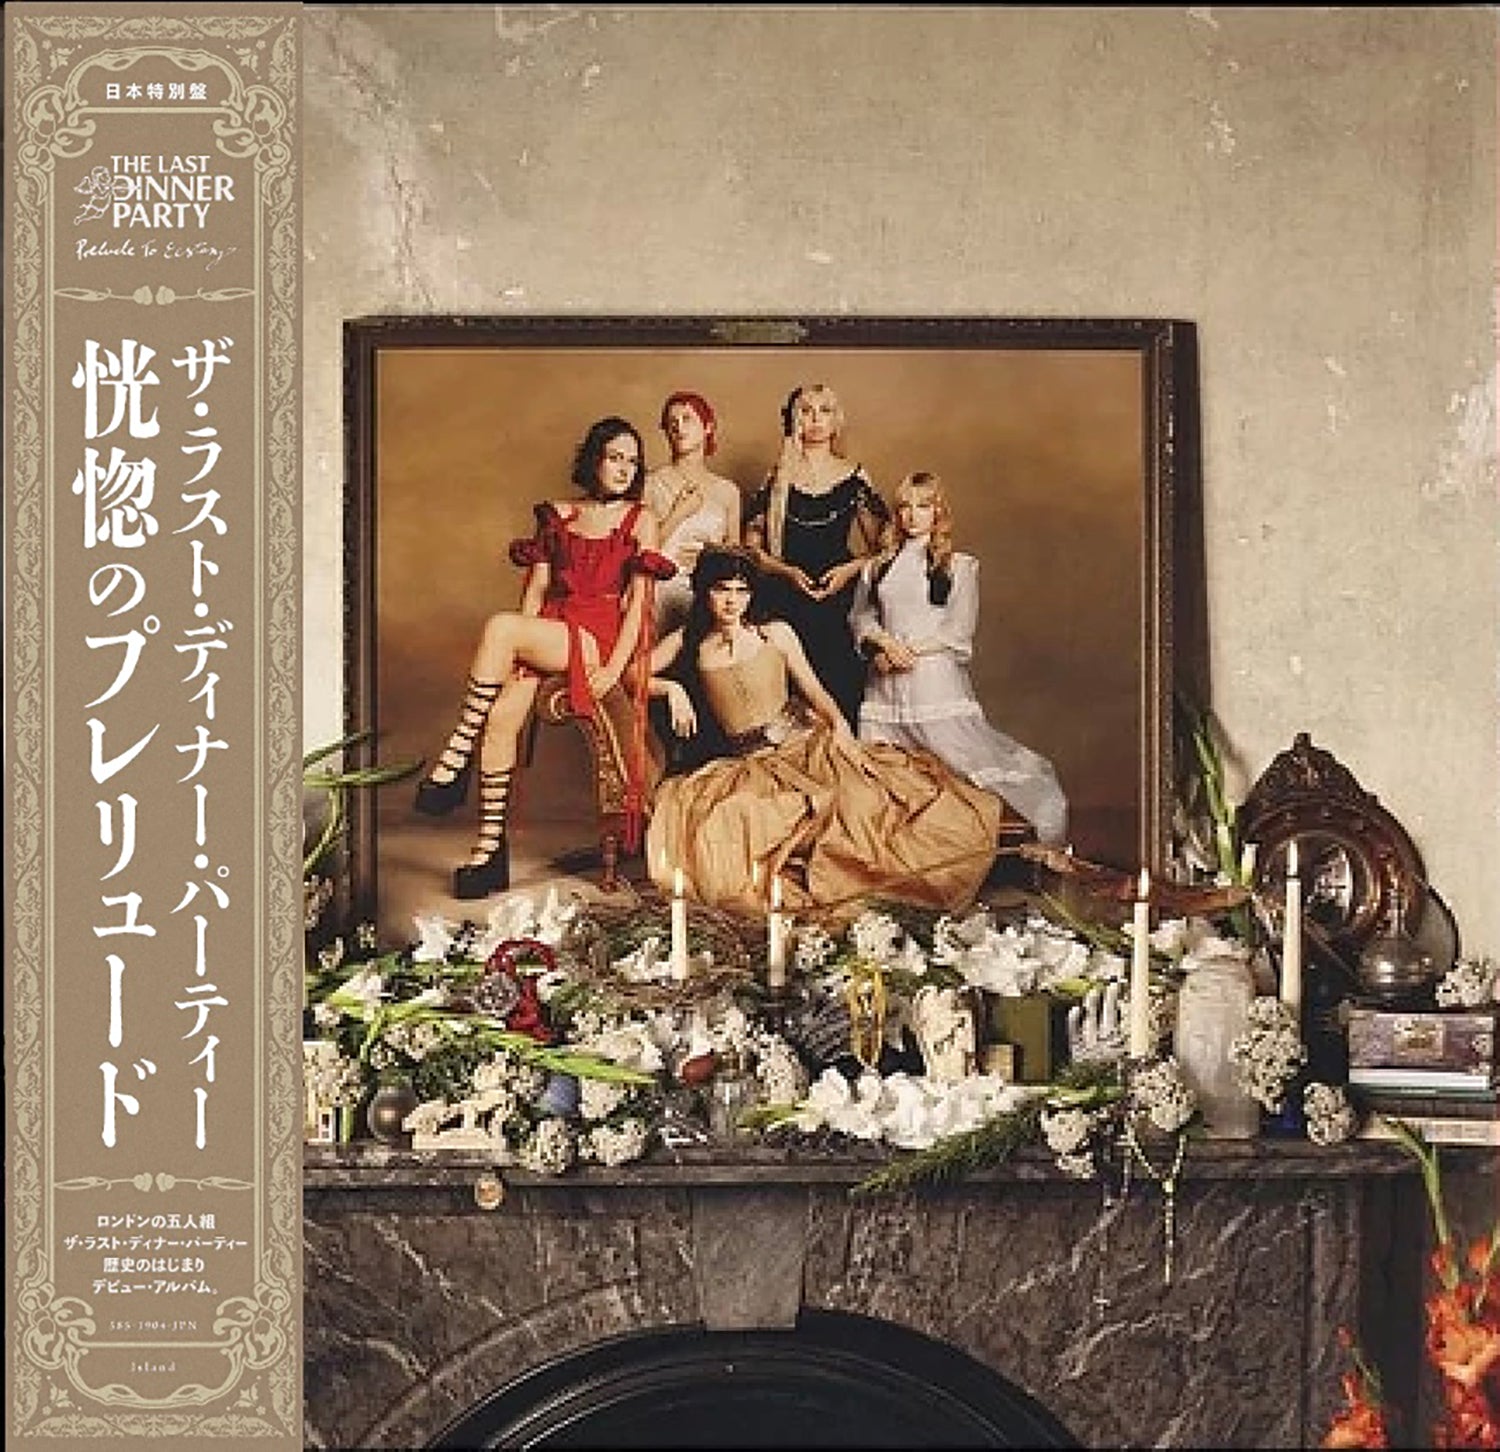 The LAST DINNER PARTY 'PRELUDE TO ECSTASY -LTD. JAPAN EDITION-'